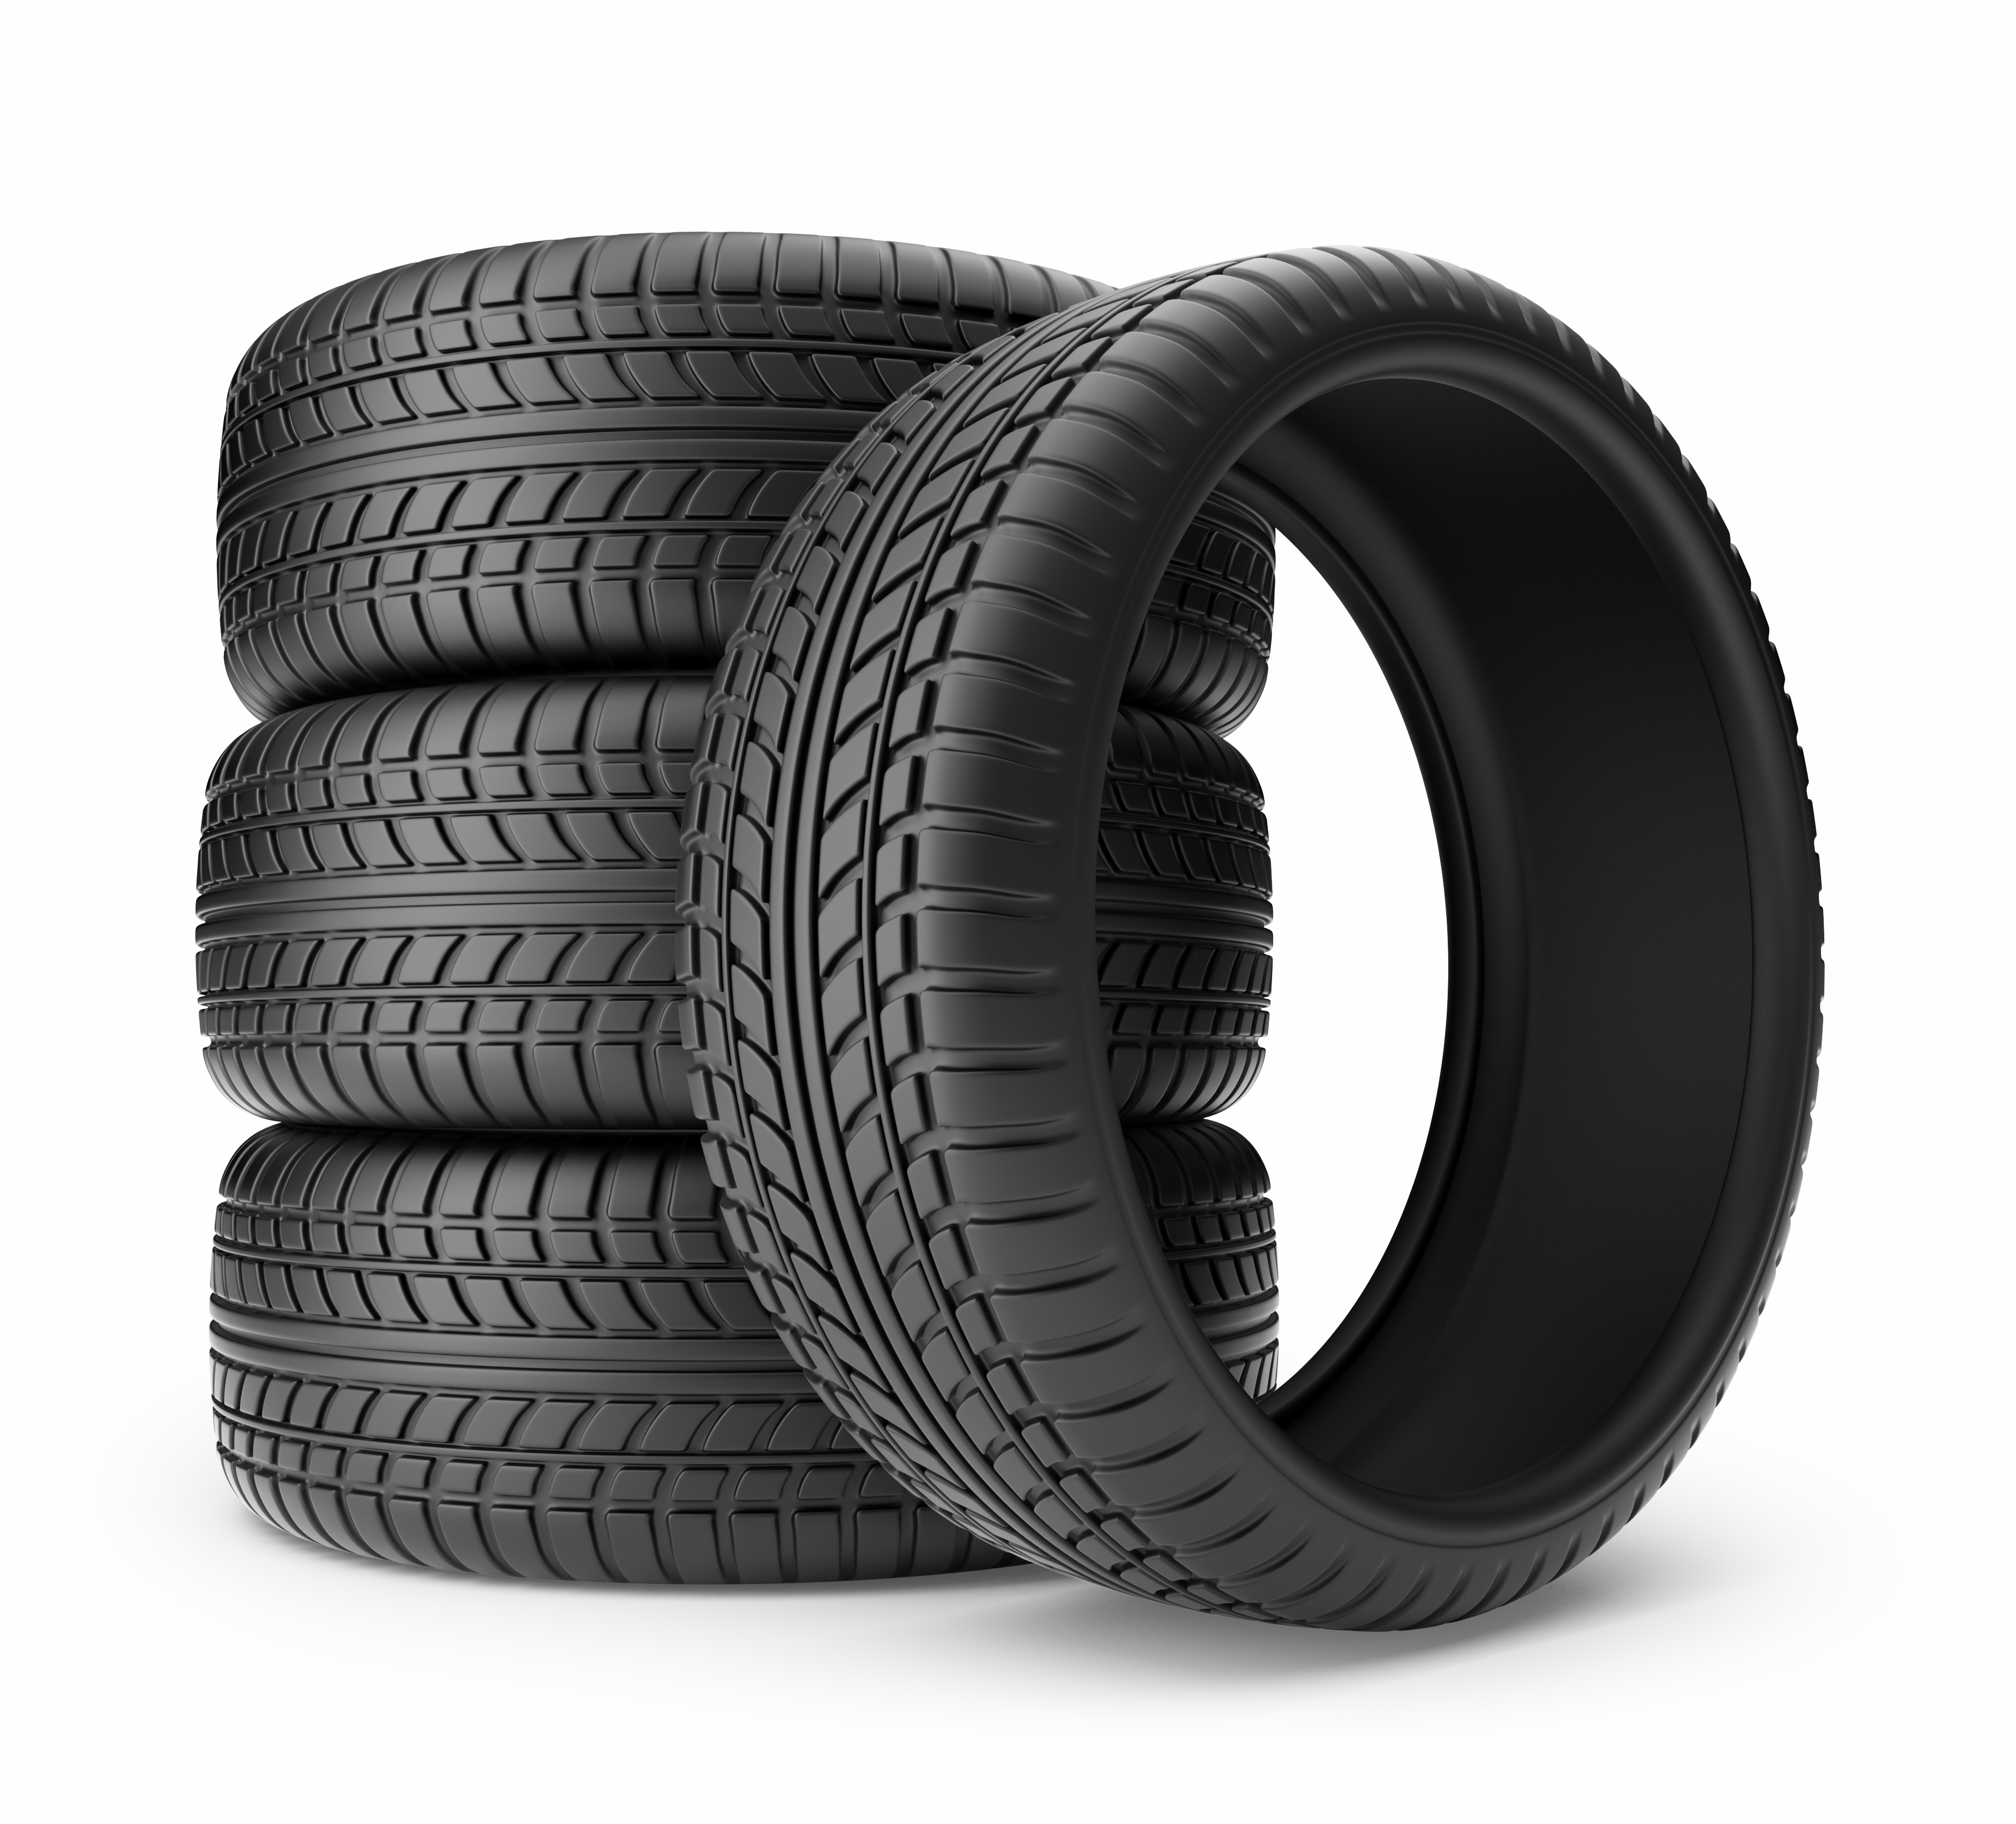 Amazing Tire Pictures & Backgrounds